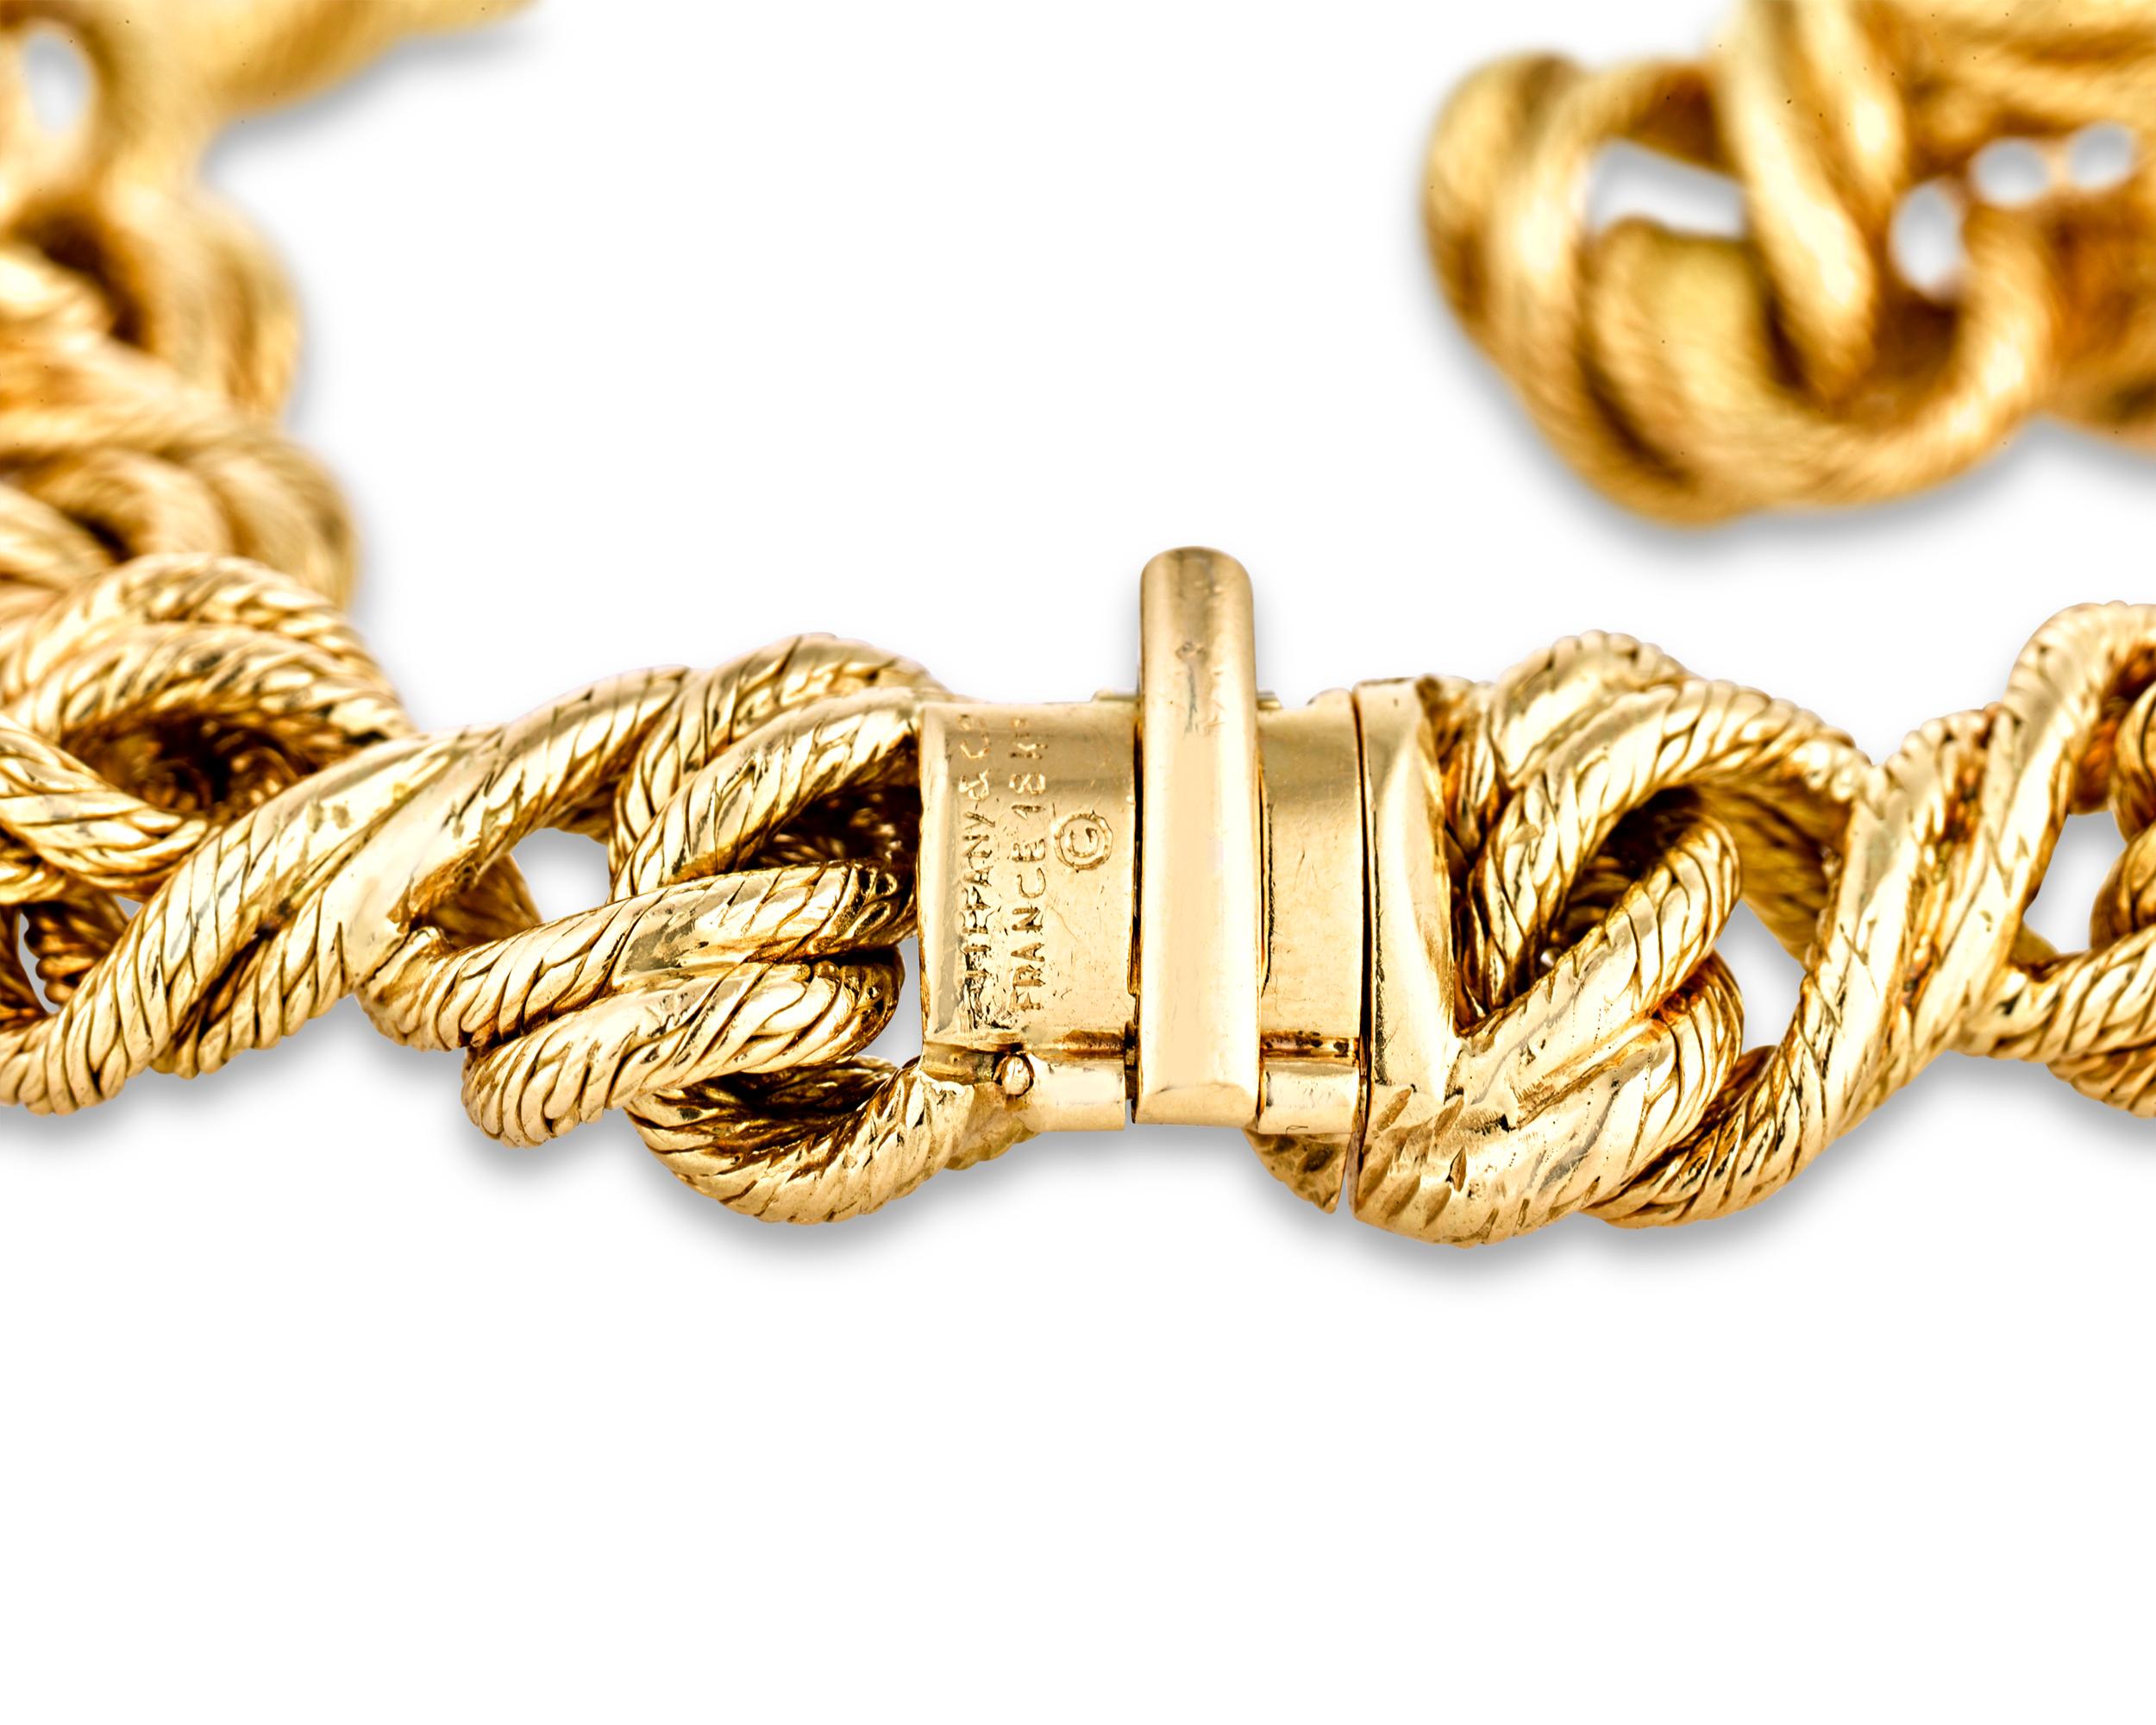 This elegant 18K yellow gold necklace by Georges L'Enfant for Tiffany & Co. features an intriguing rope-like appearance. The two-toned gold is textured and twisted, a signature technique for L'Enfant, creating depth and visual interest within the